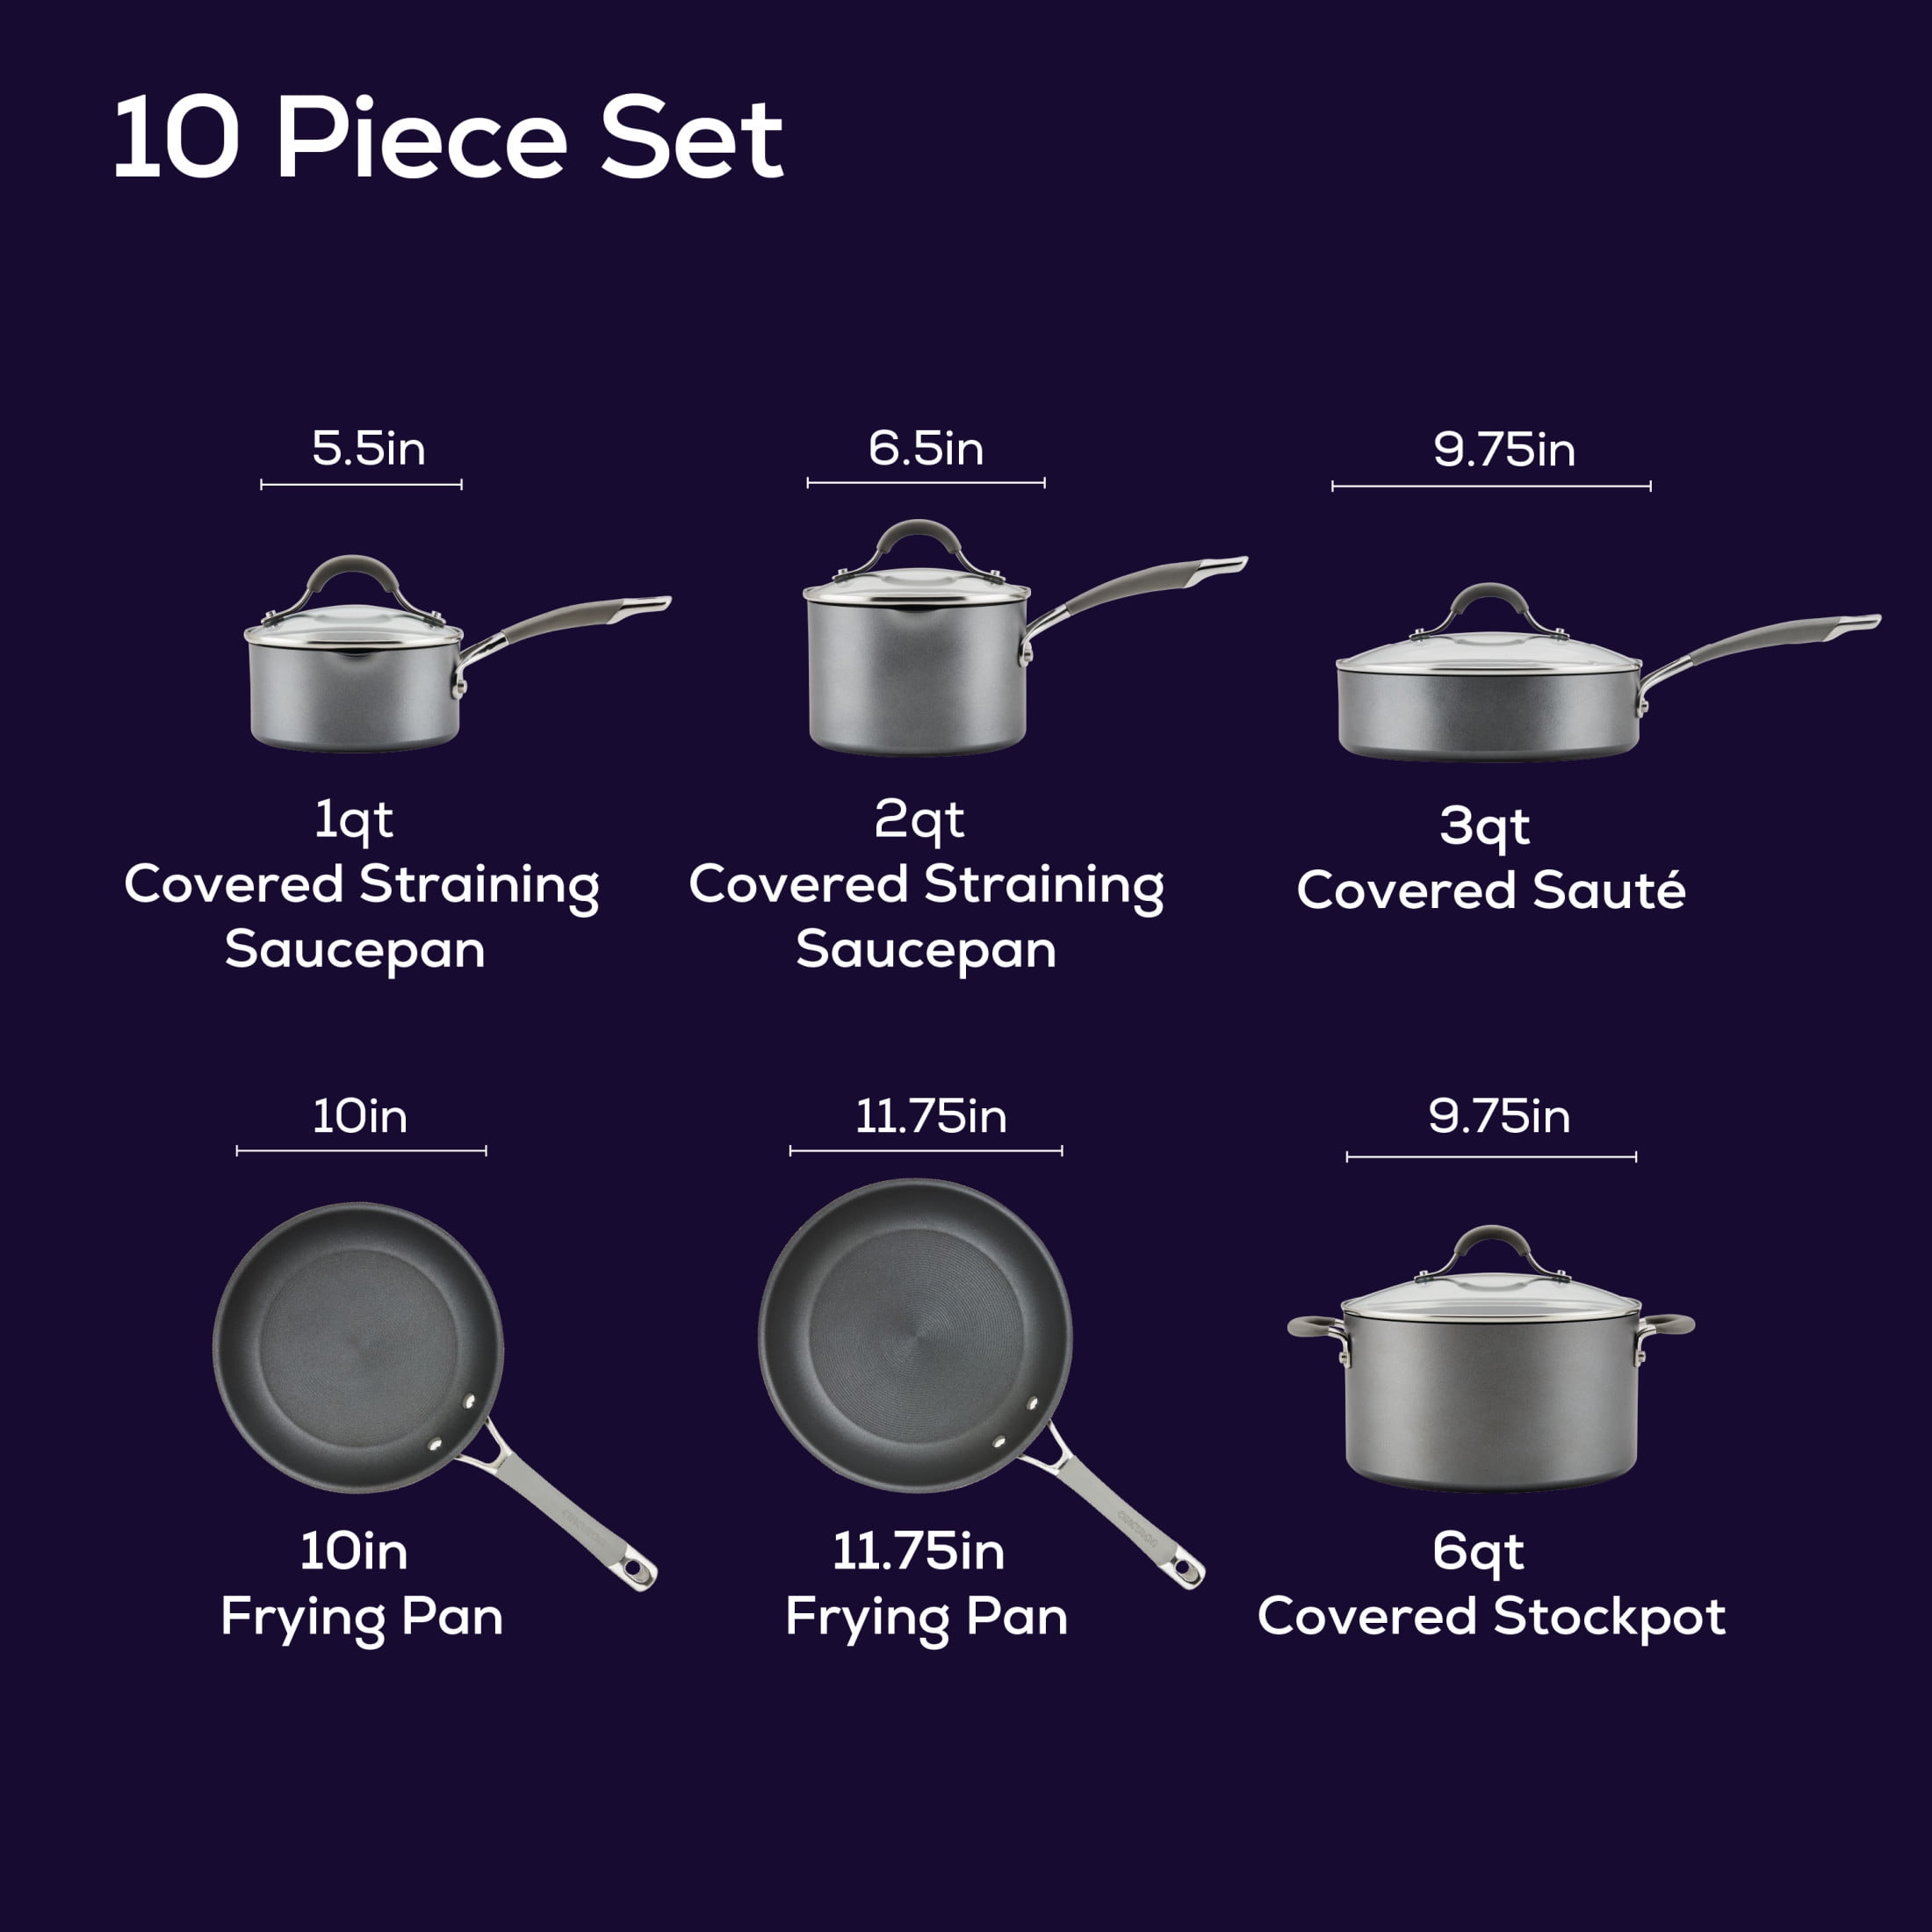 Circulon Elementum Hard-Anodized Nonstick Covered Sautéuse, 4 Quart, Oyster  Gray/Clear/Silver & Reviews